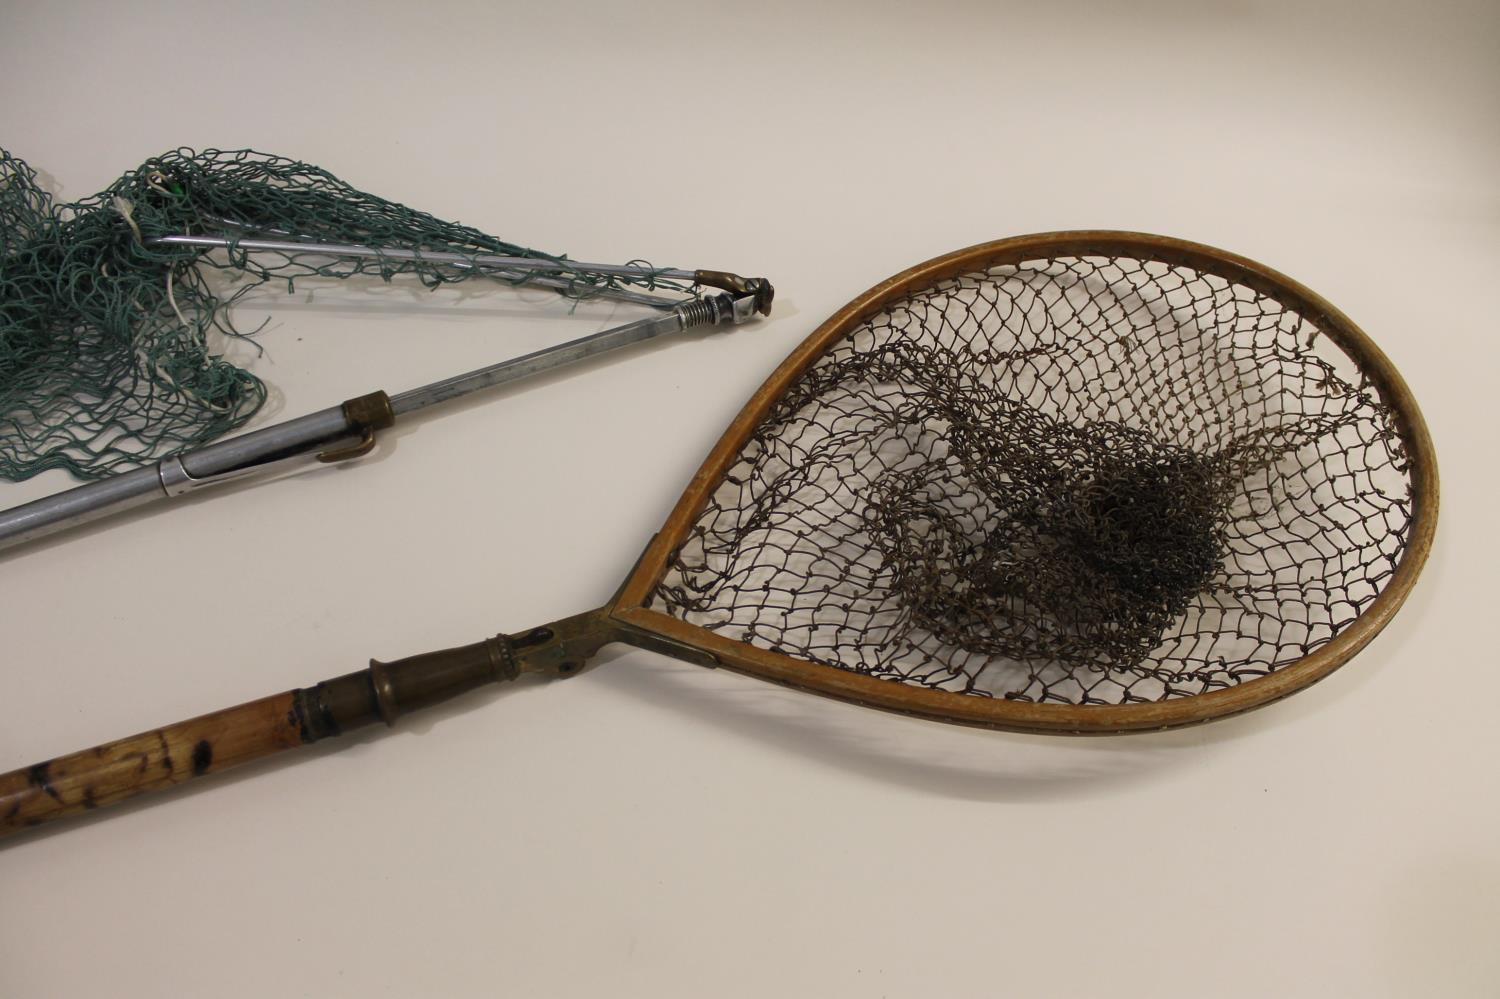 A HARDY 'THE CURATE' FLY FISHERMAN'S TOOL & FISHING ACCESSORIES. - Image 4 of 5